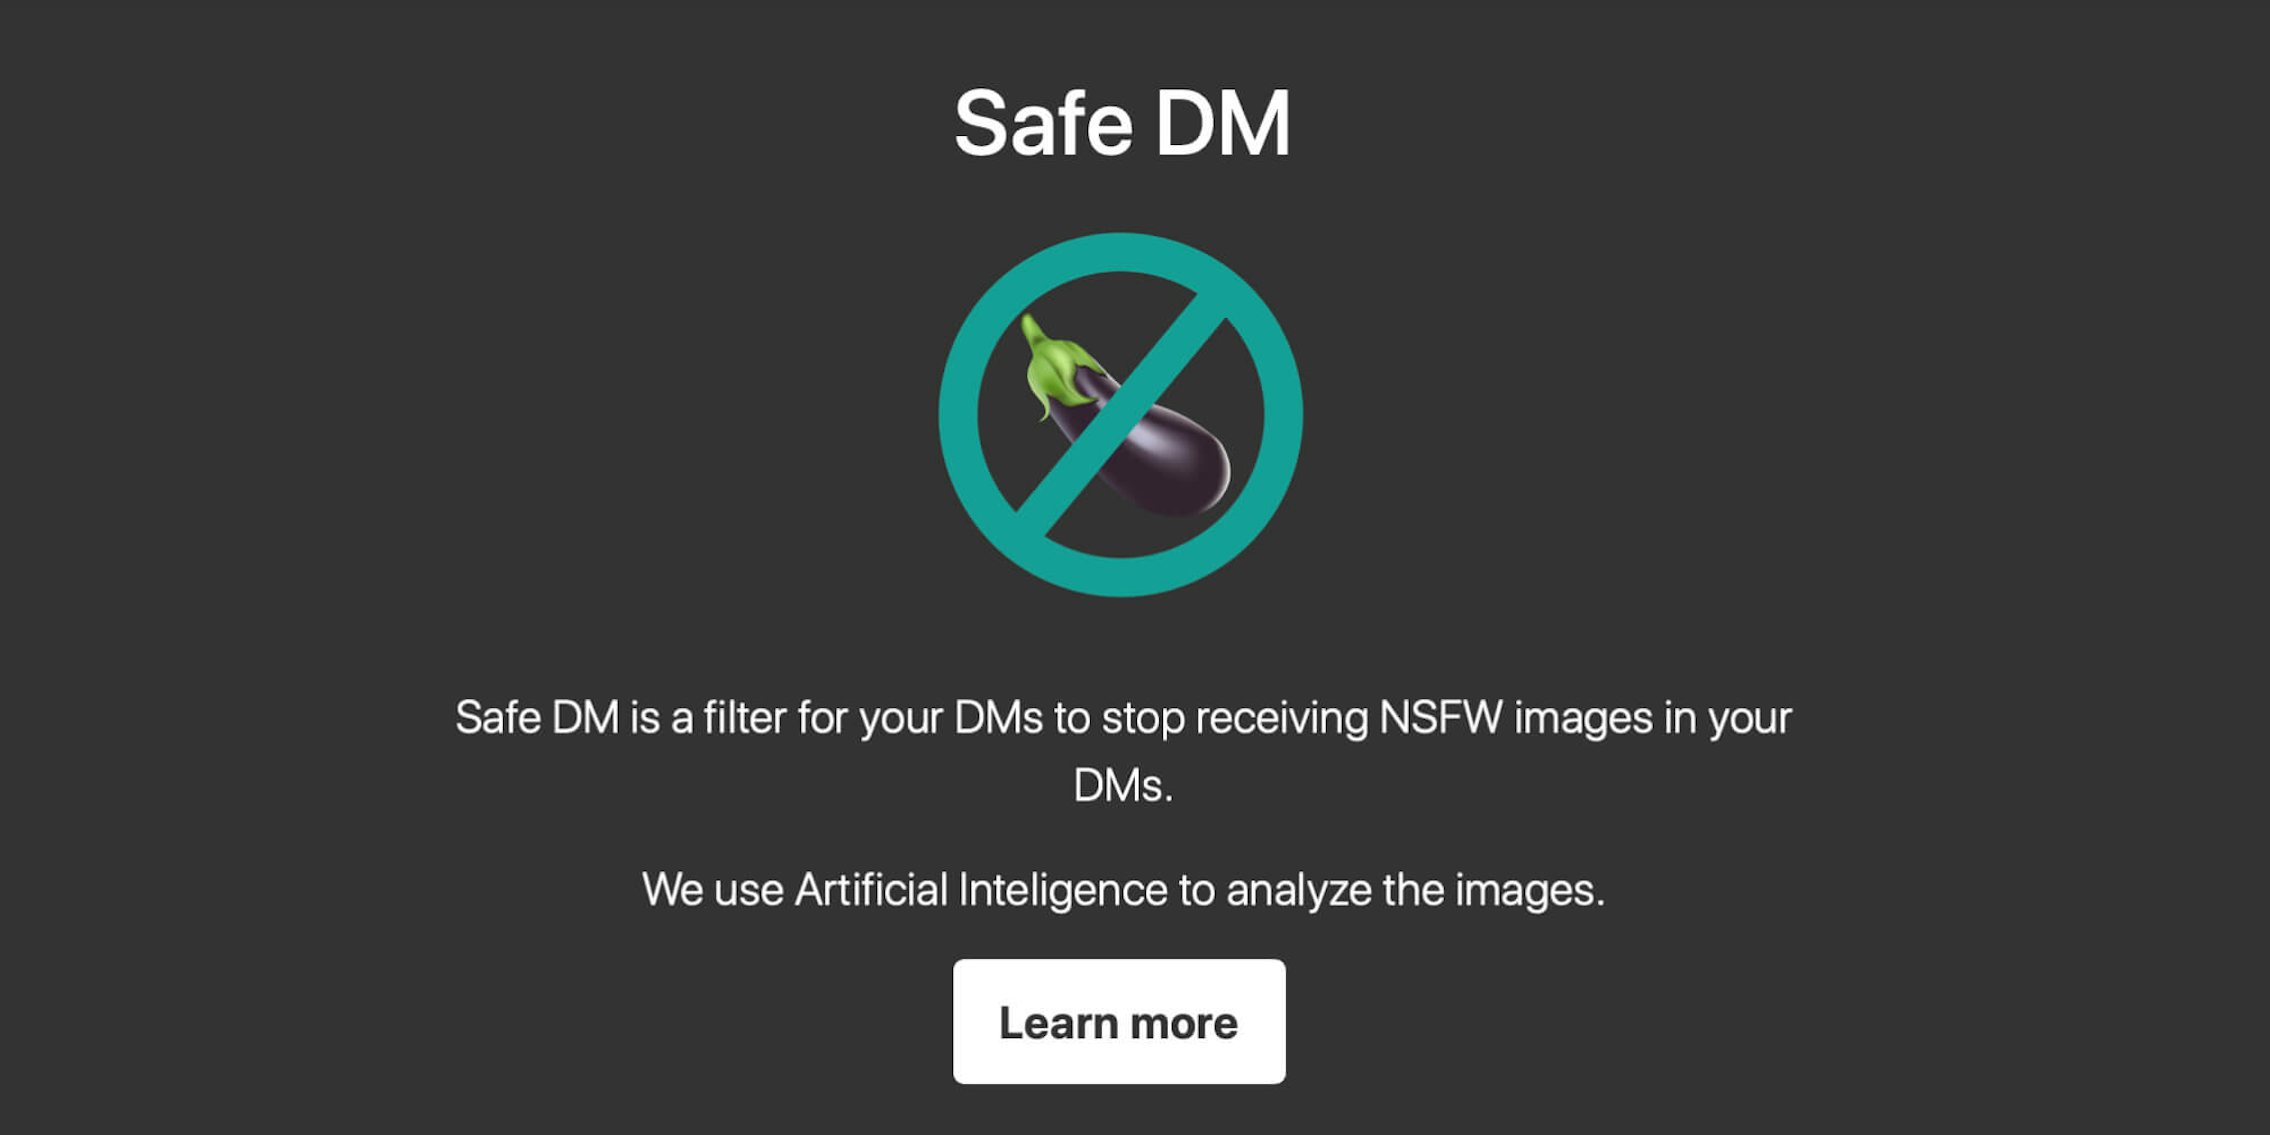 Safe DM removes unwanted nude pictures